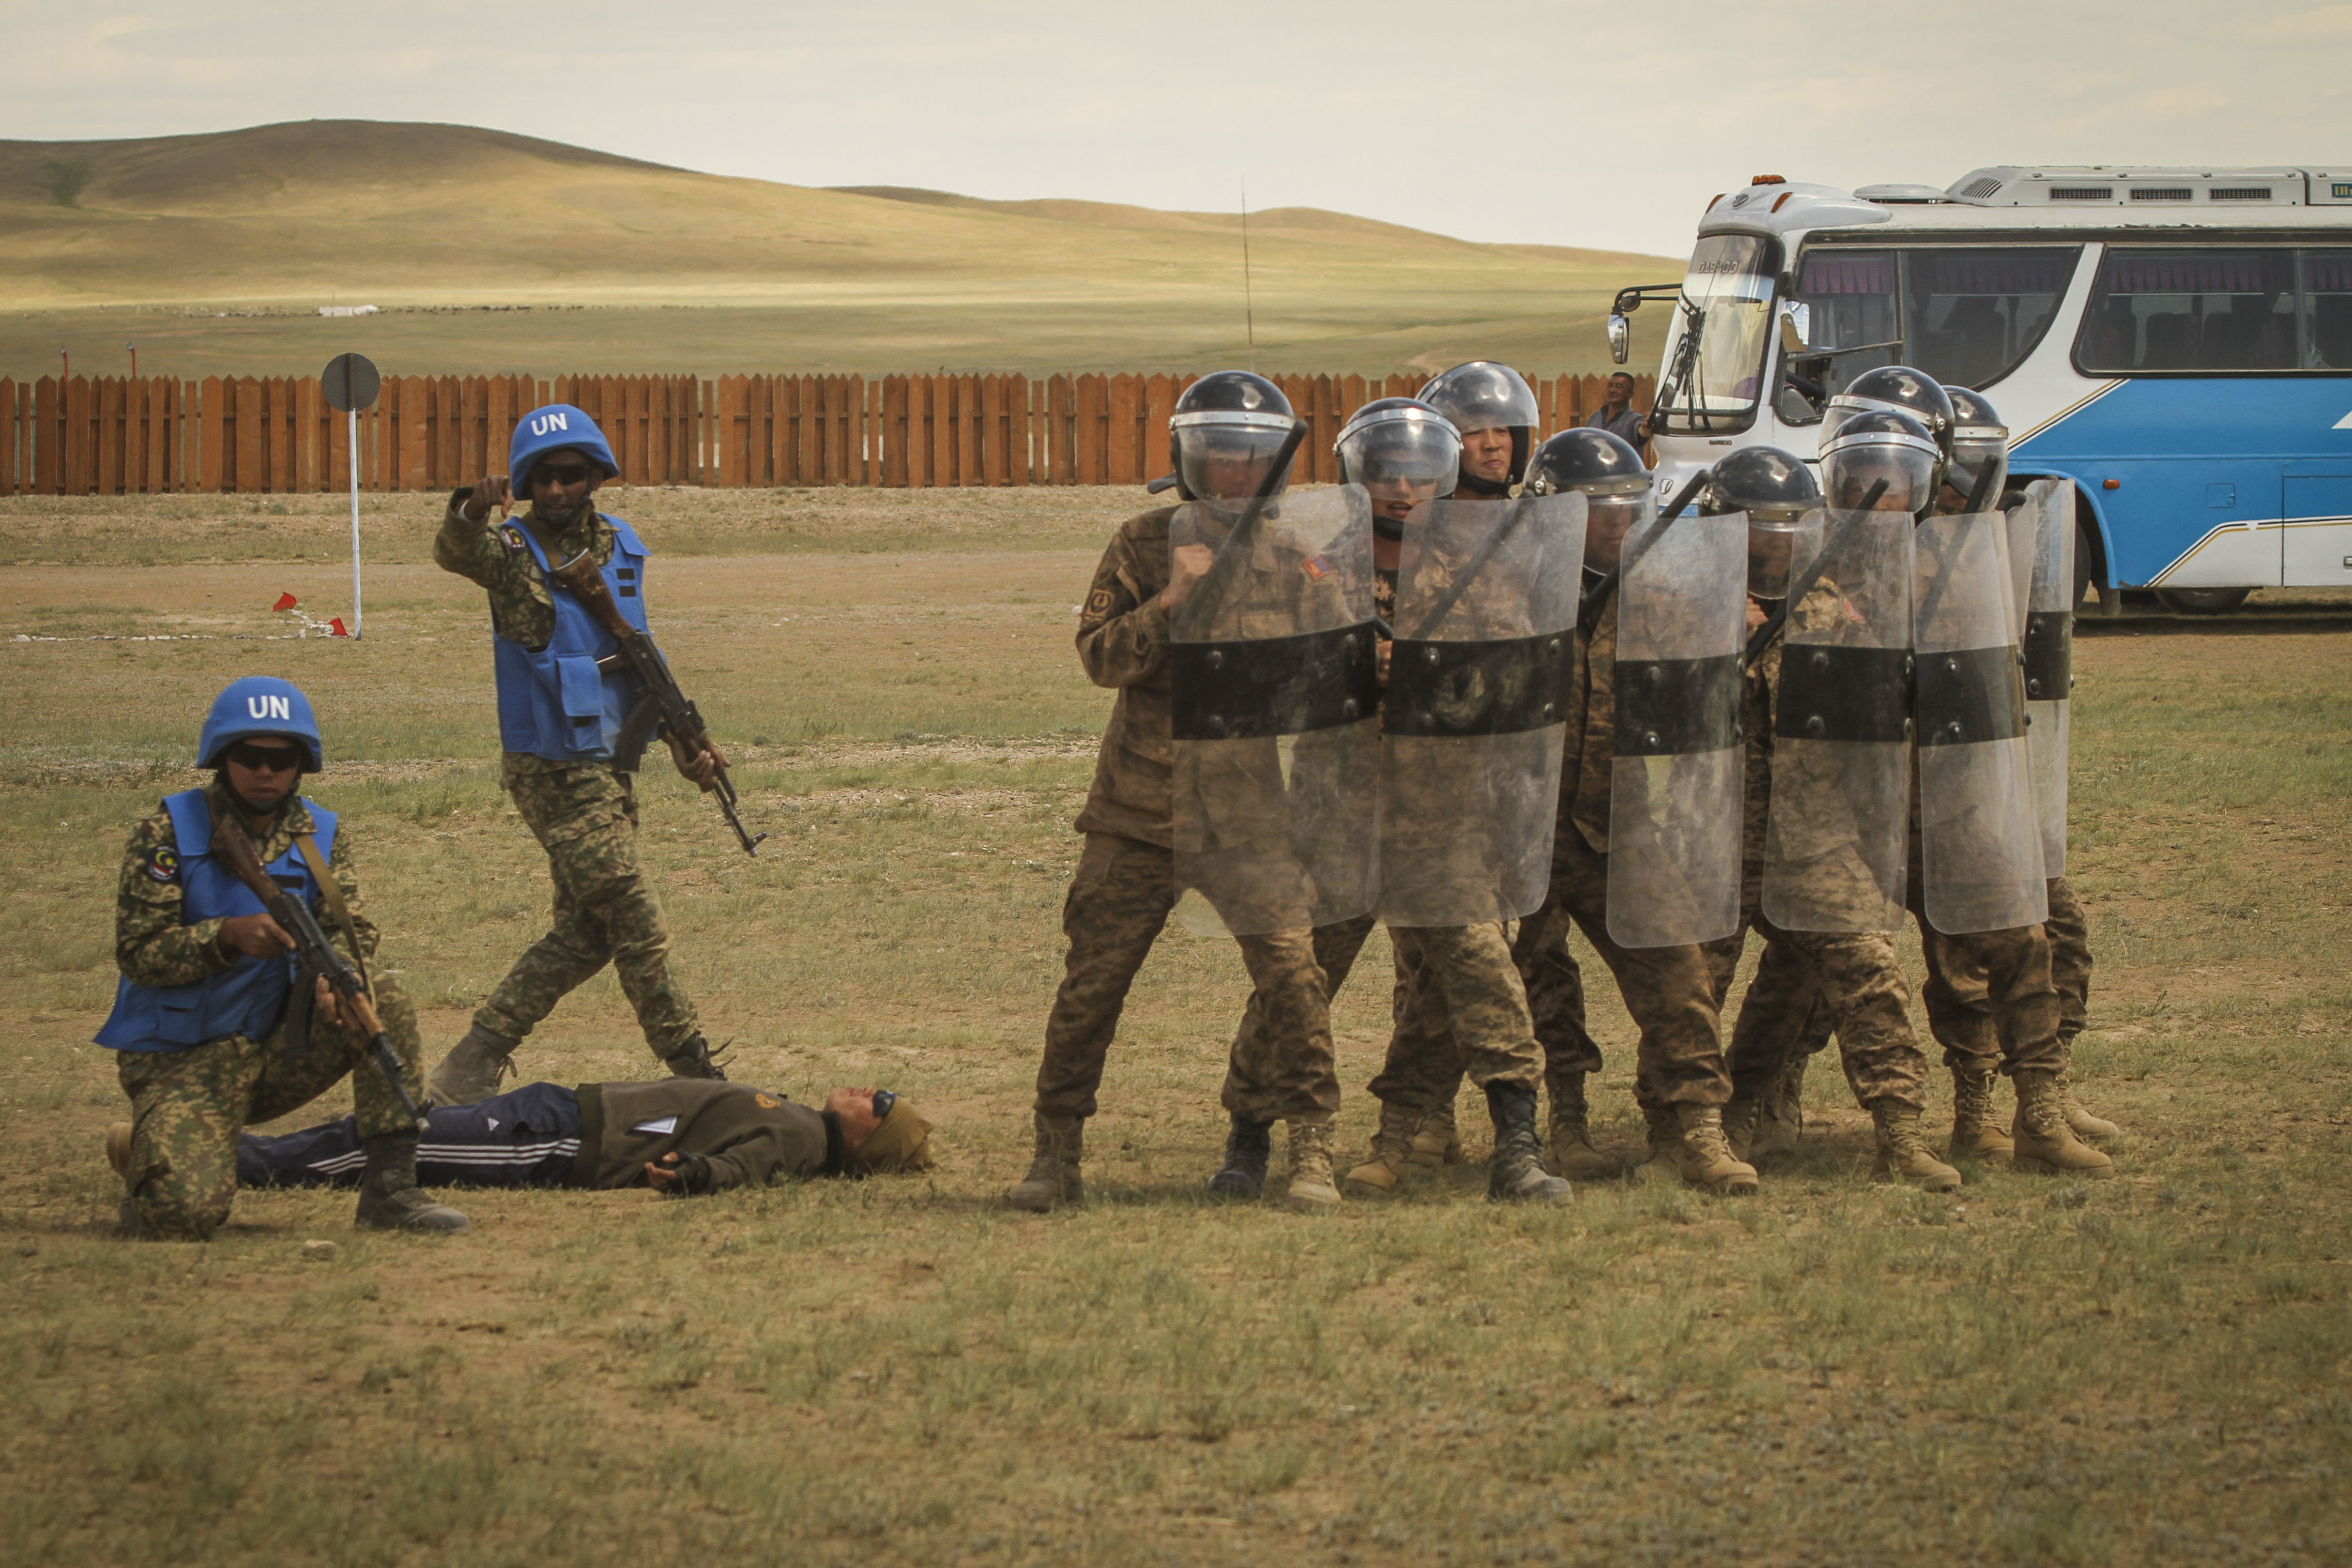 Riot control simulator. Riot Control Training. Mongolia Army. Mongolian Armed Forces.